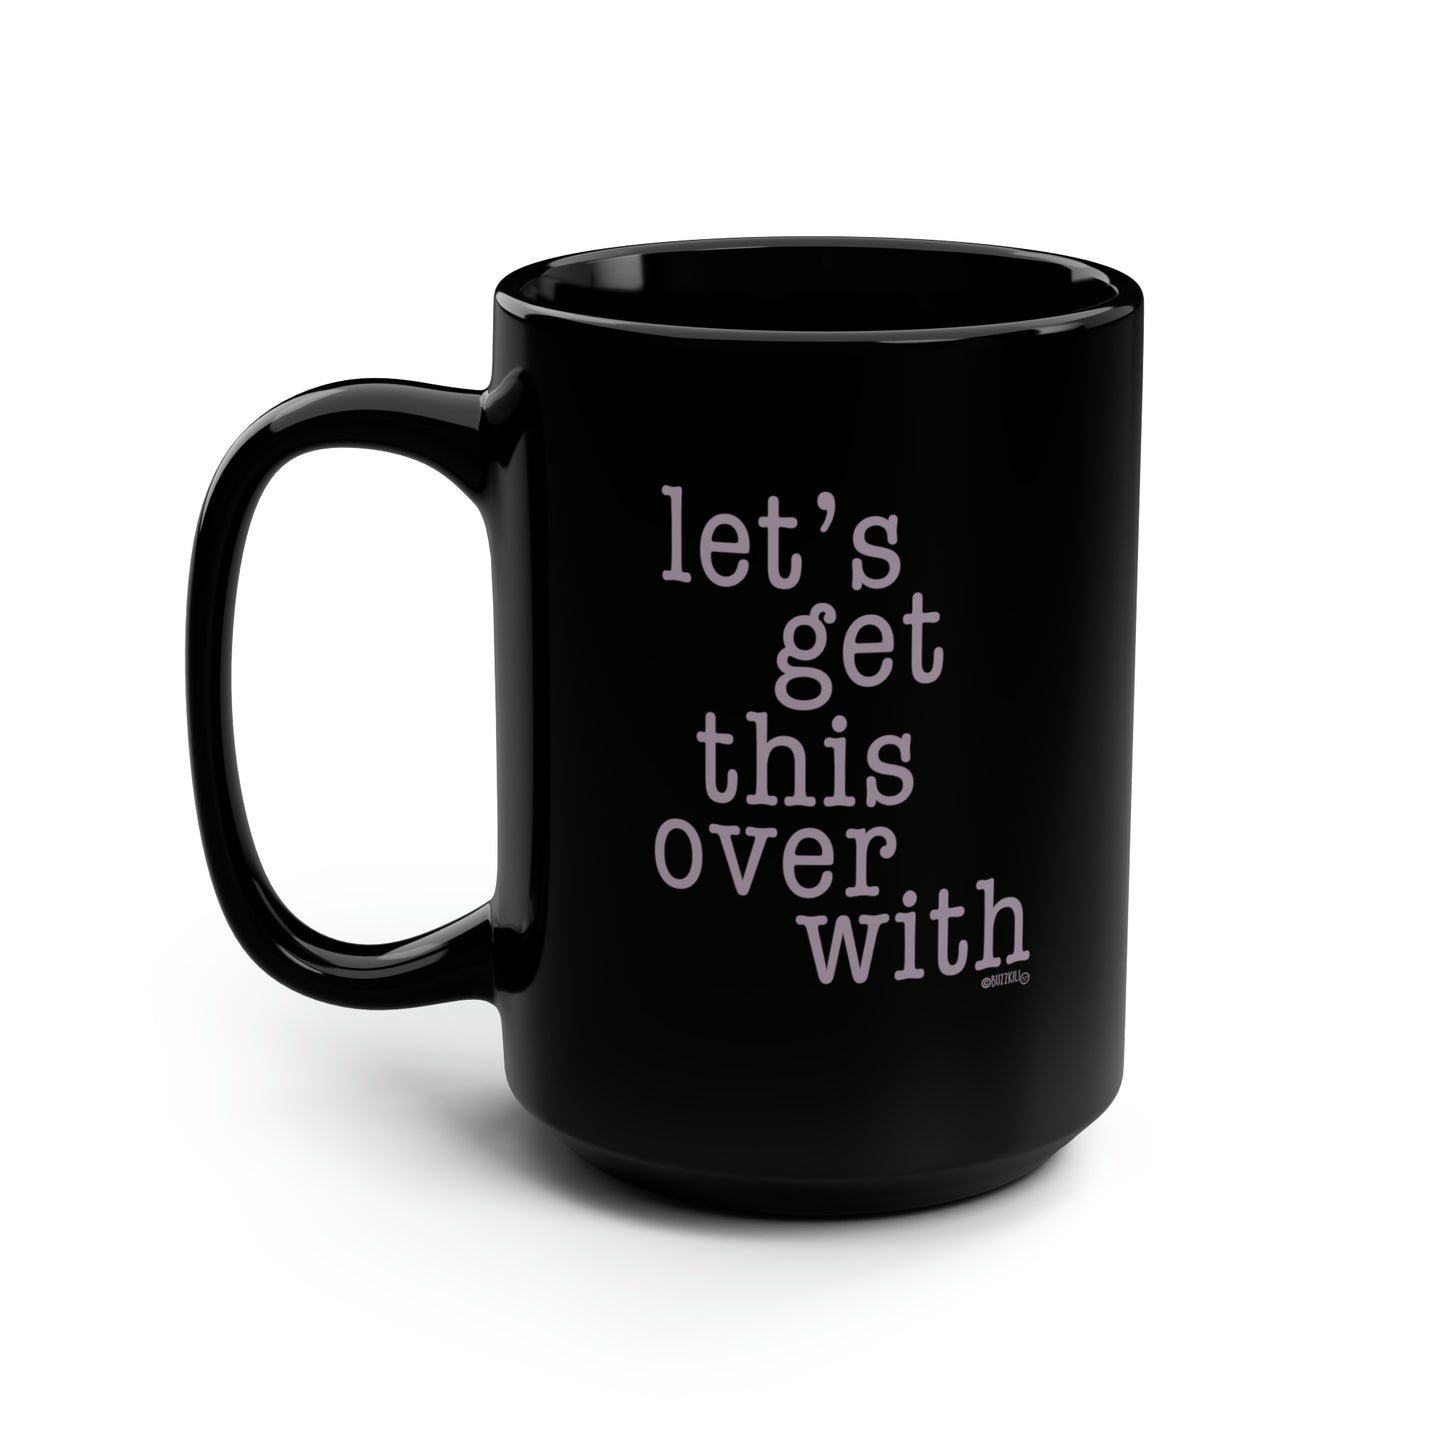 Let's Get This Over With - Black Mug, 15oz